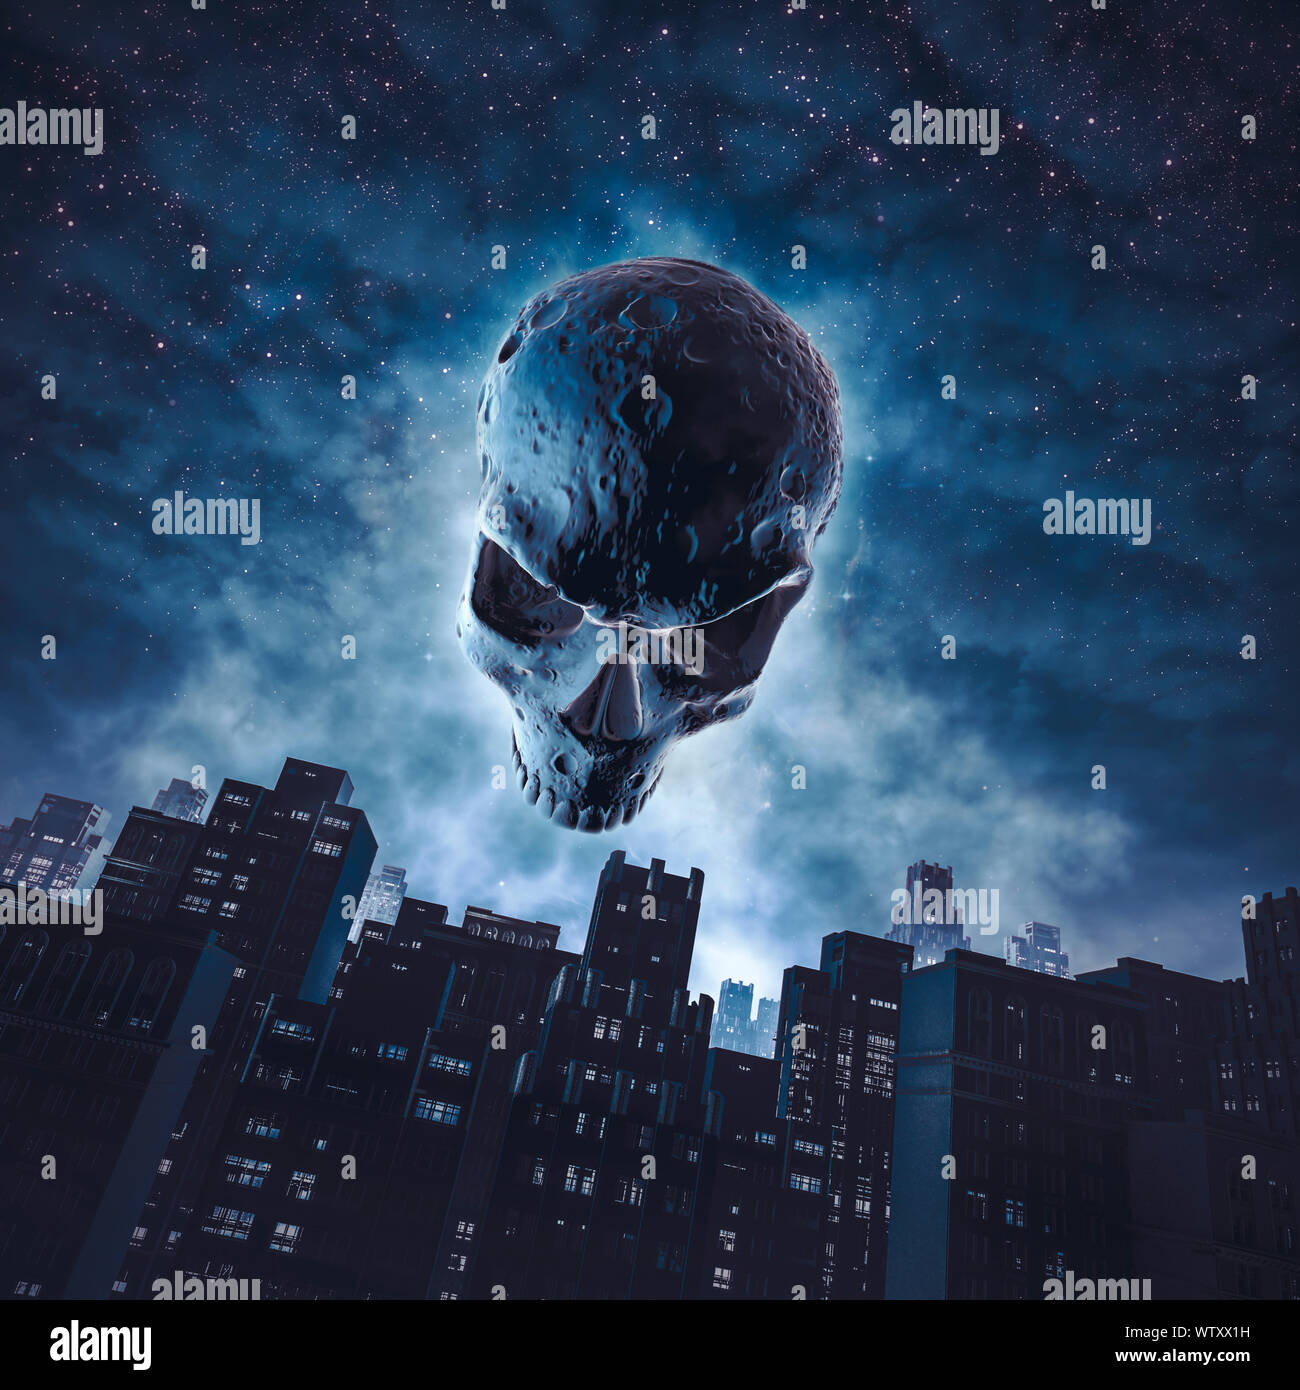 The face of Halloween / 3D illustration of skull moon rising over city buildings against starry night sky Stock Photo